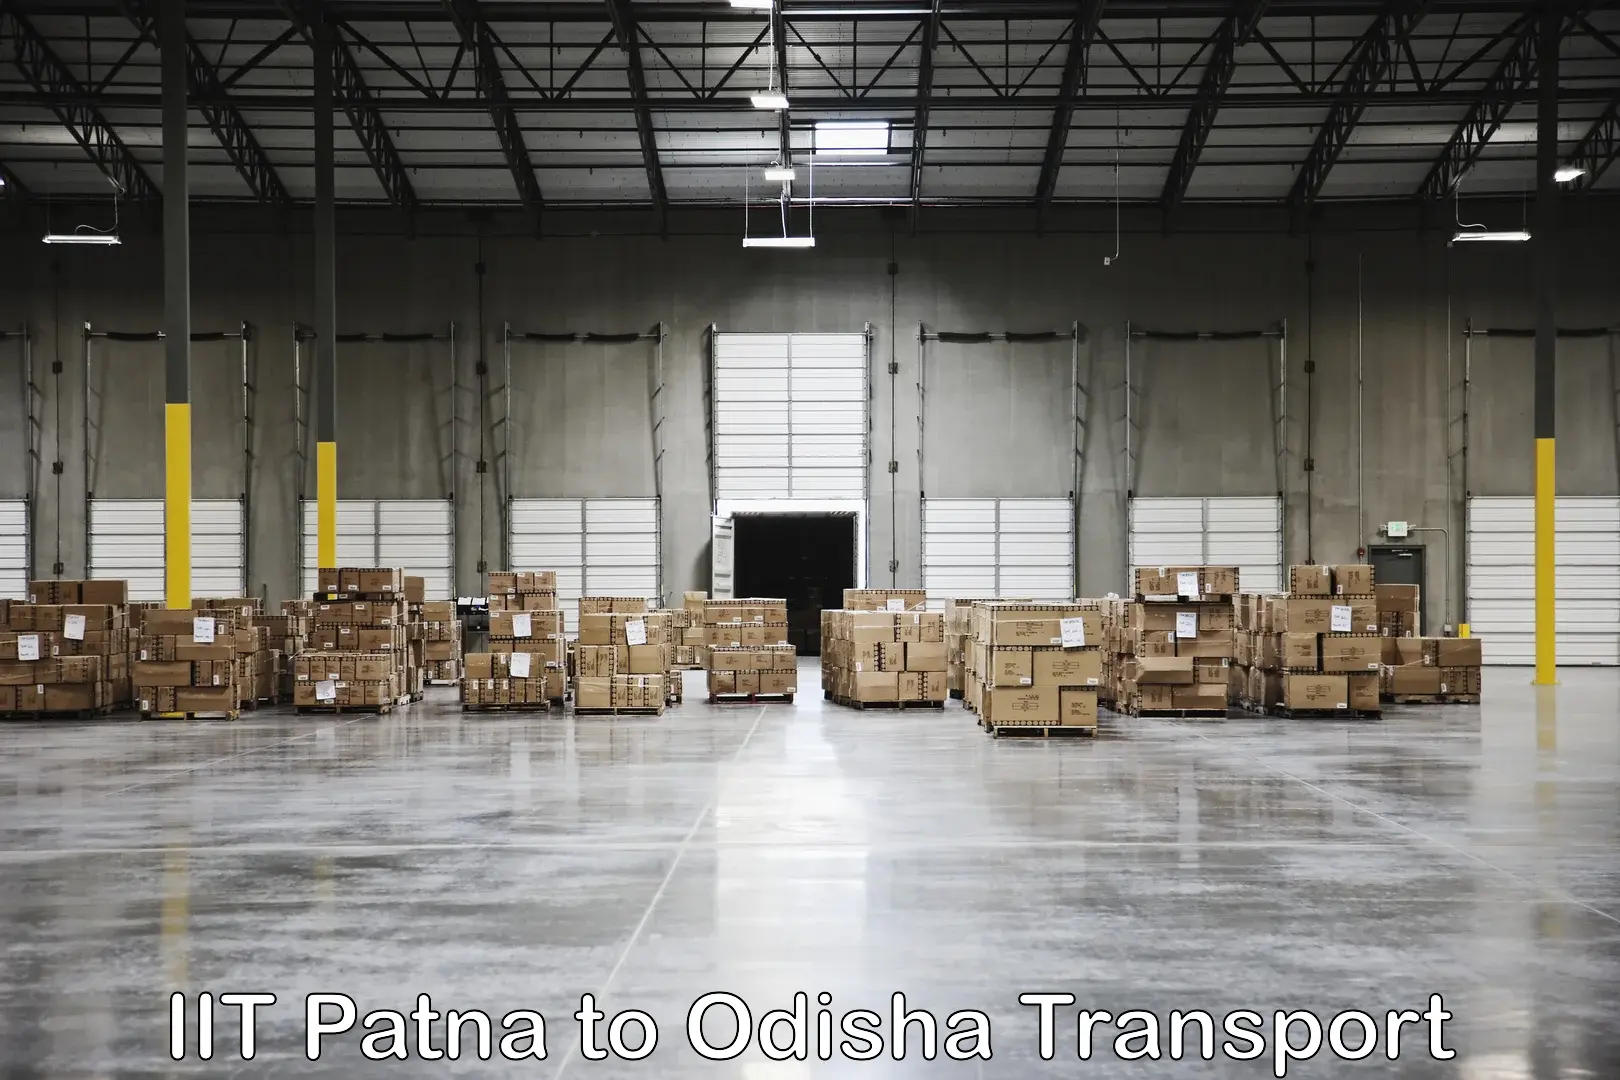 Container transport service IIT Patna to Chandbali